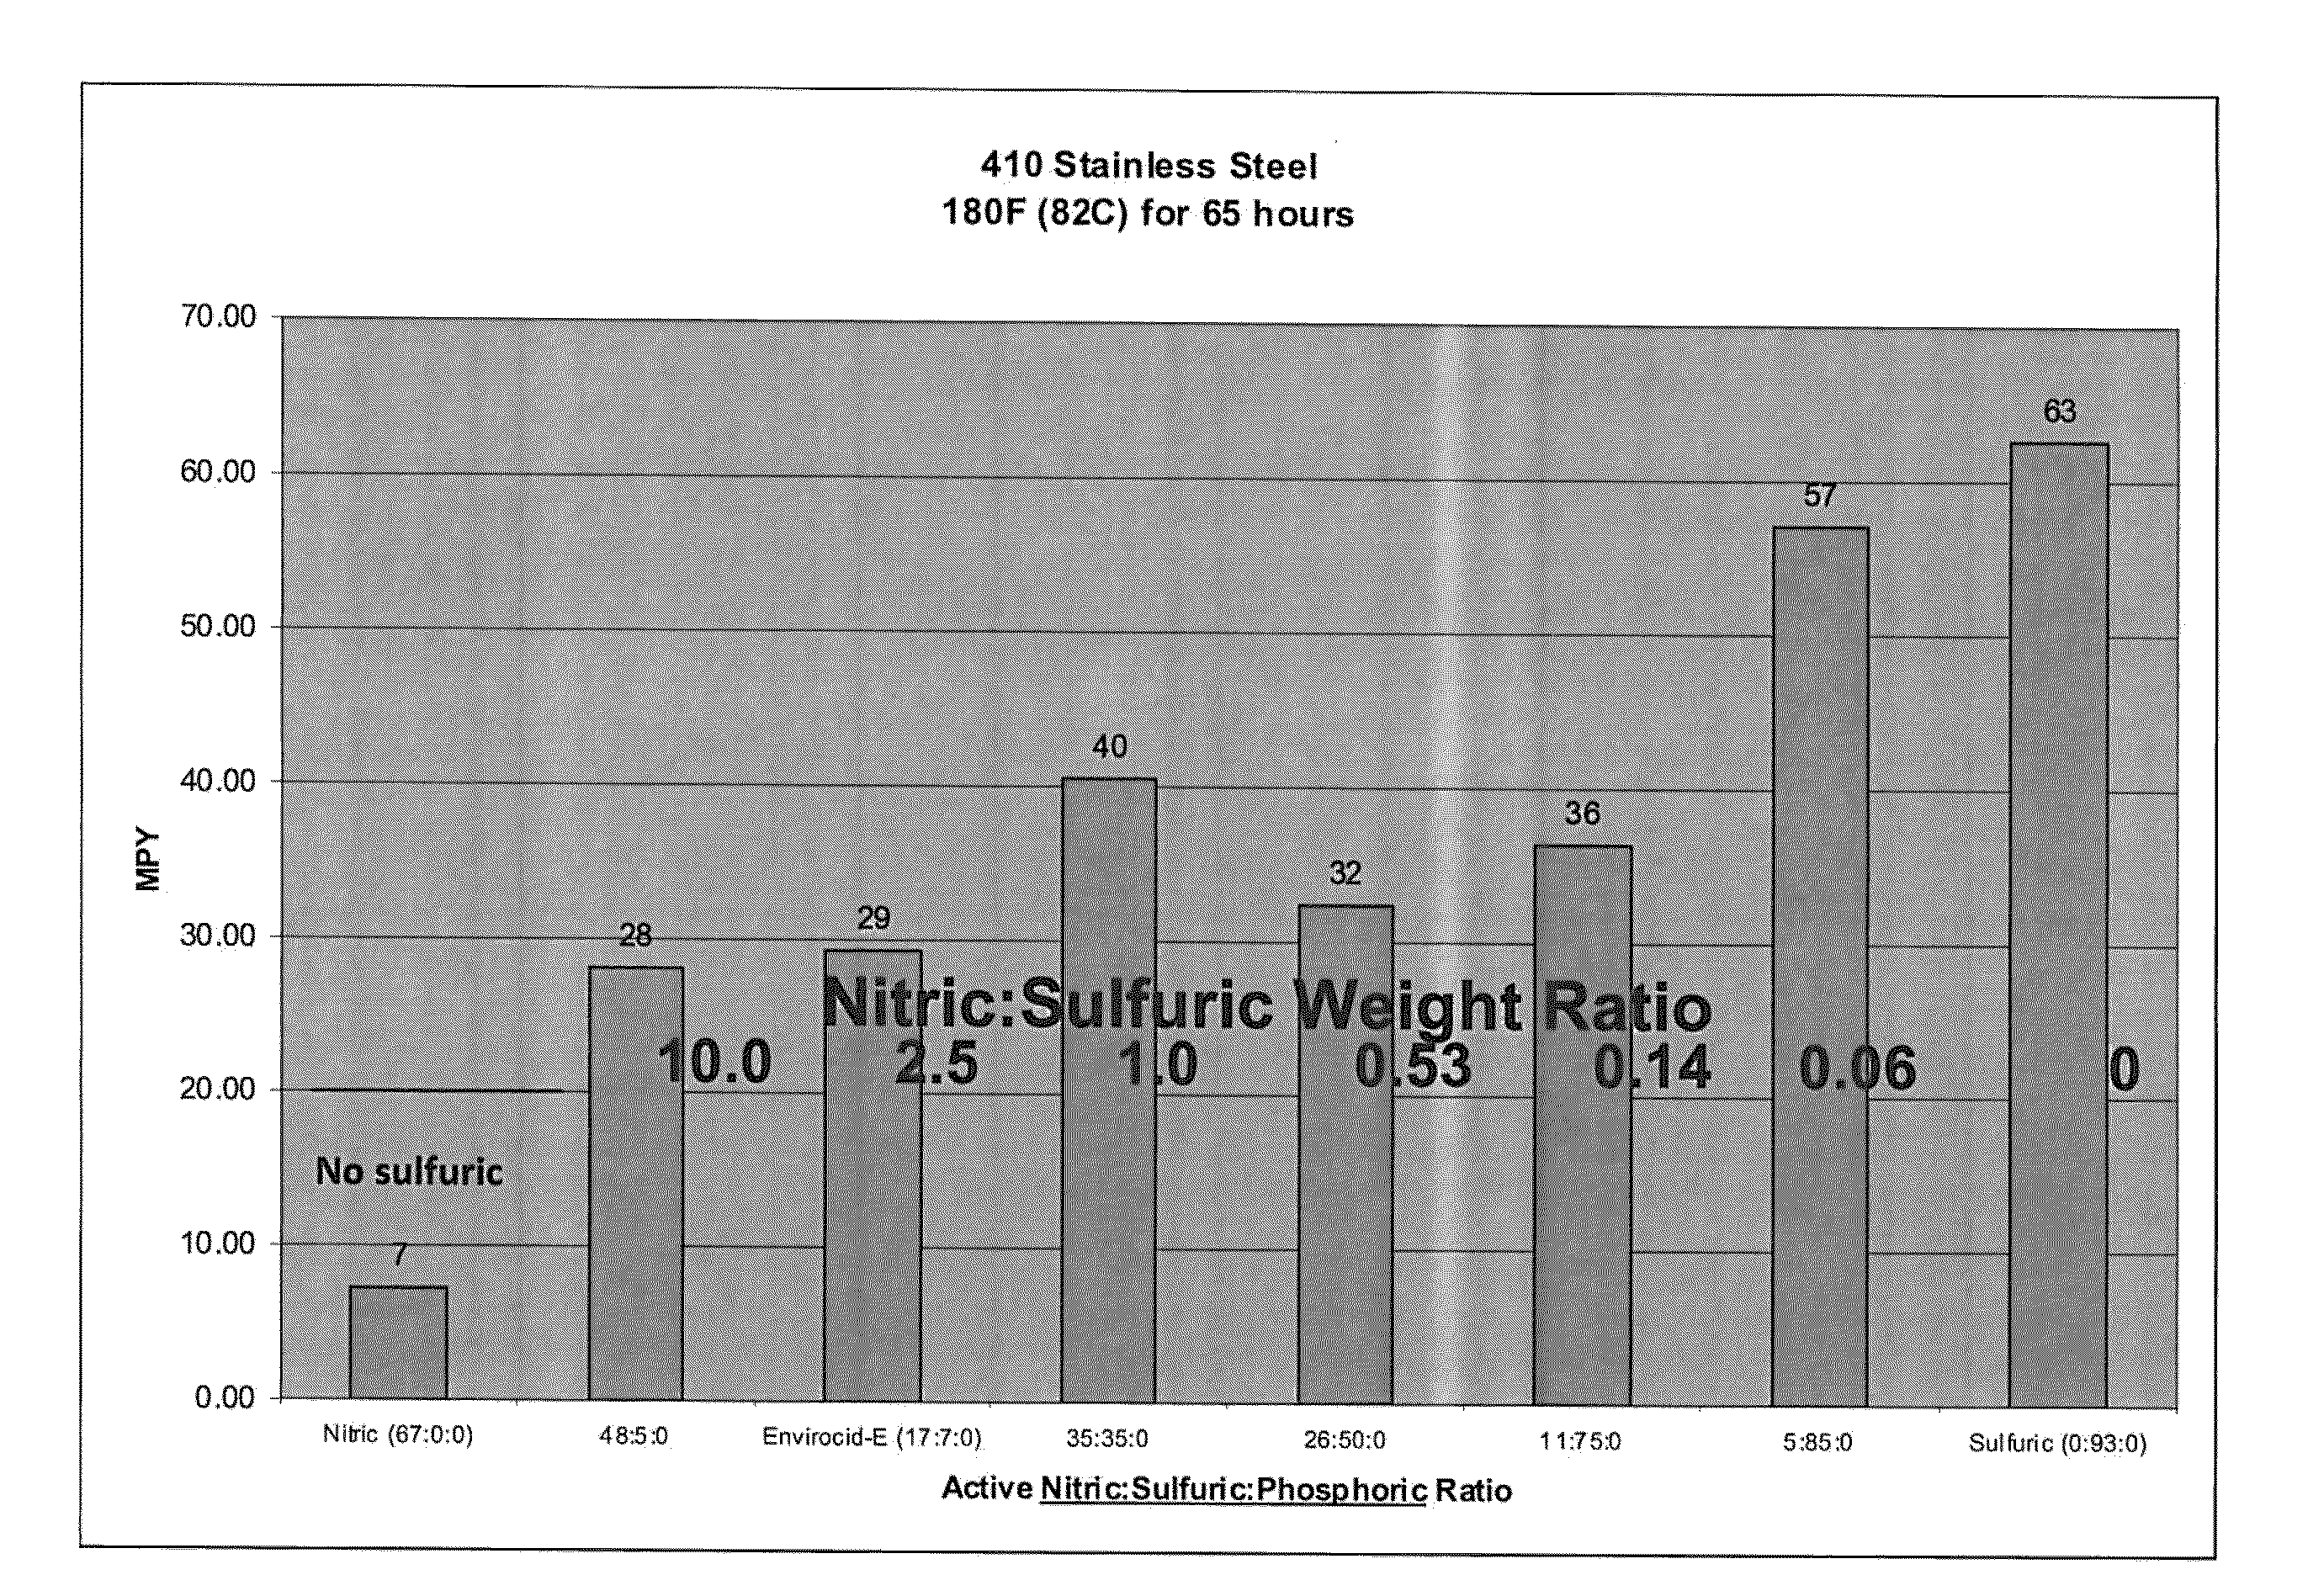 Acid cleaning and corrosion inhibiting compositions comprising a blend of nitric and sulfuric acid